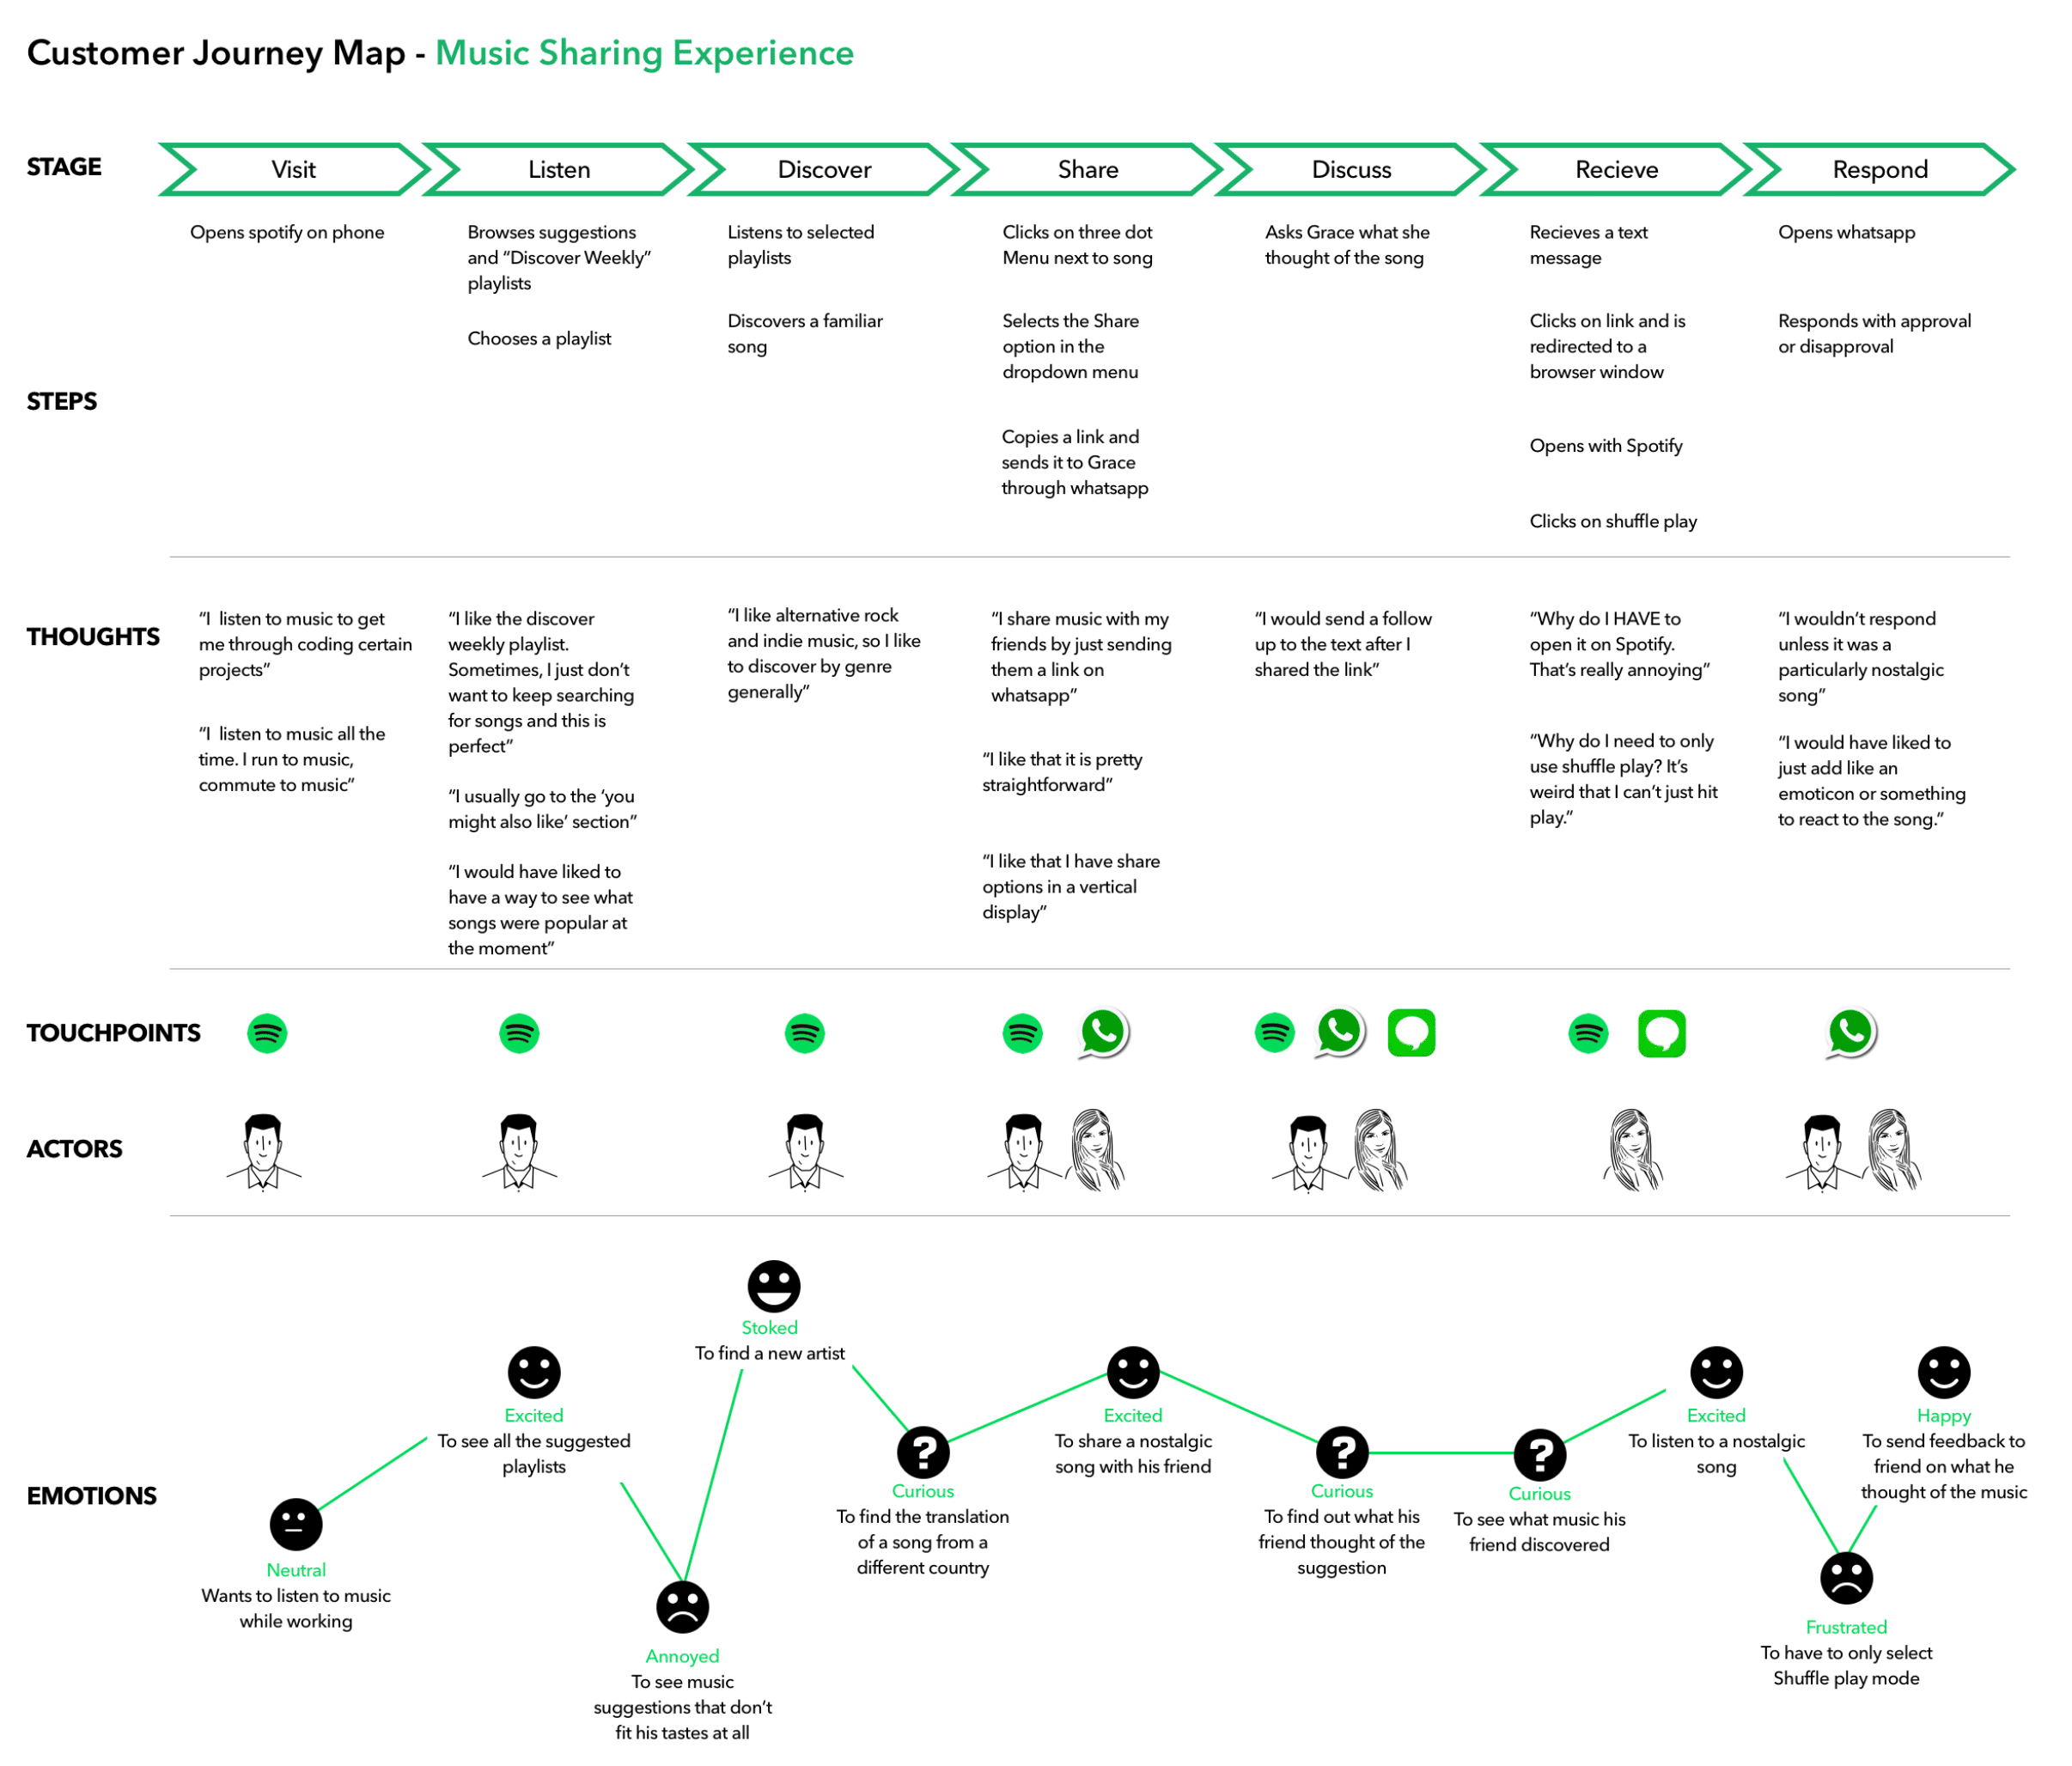 customer journey map from Spotify